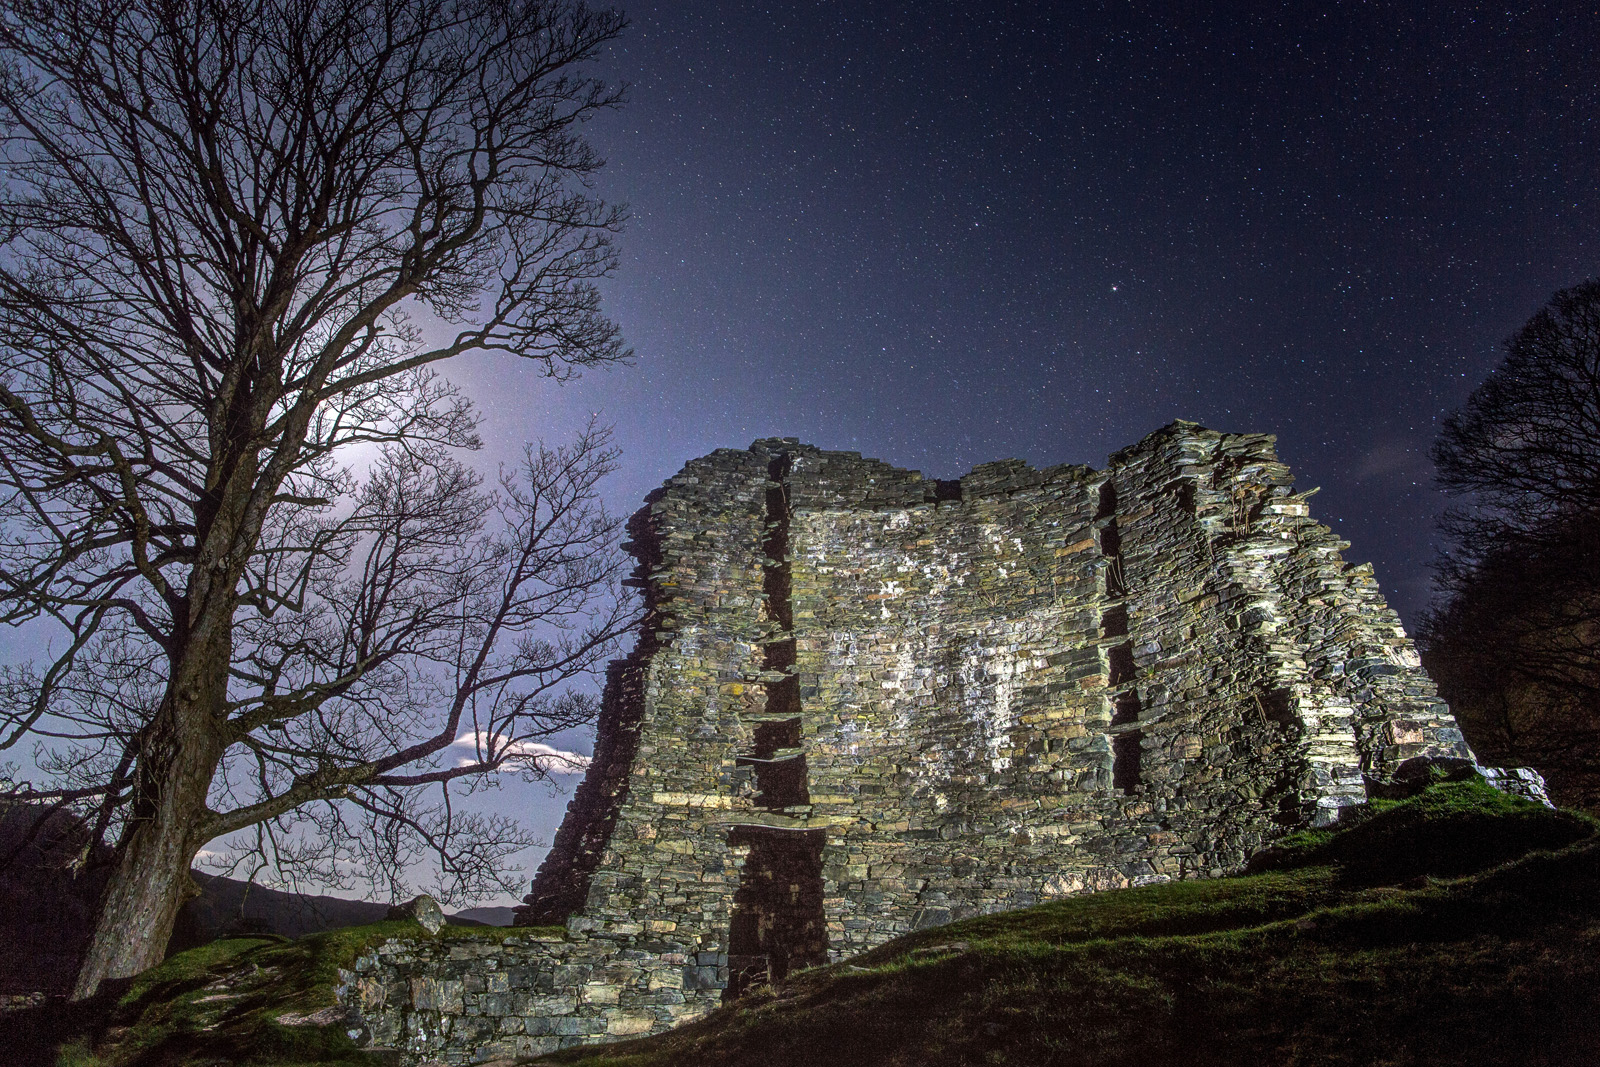 Airlie Tower by starlight